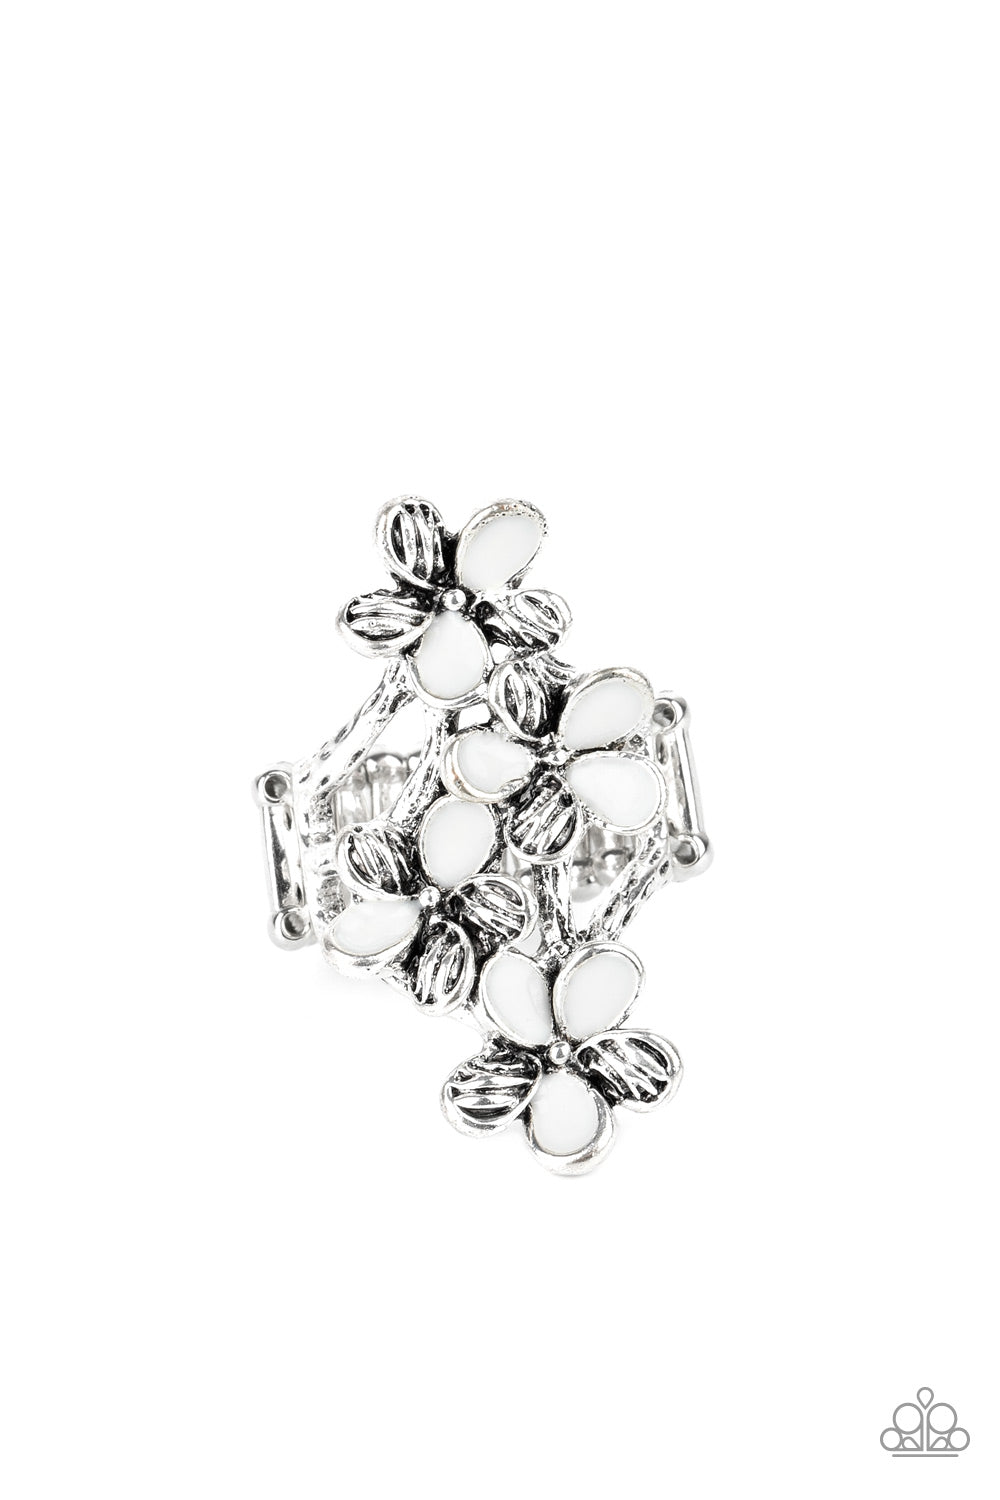 Featuring shiny white and textured silver petals, colorful flowers dance across the finger, coalescing into a whimsical frame atop the finger. Features a stretchy band for a flexible fit.